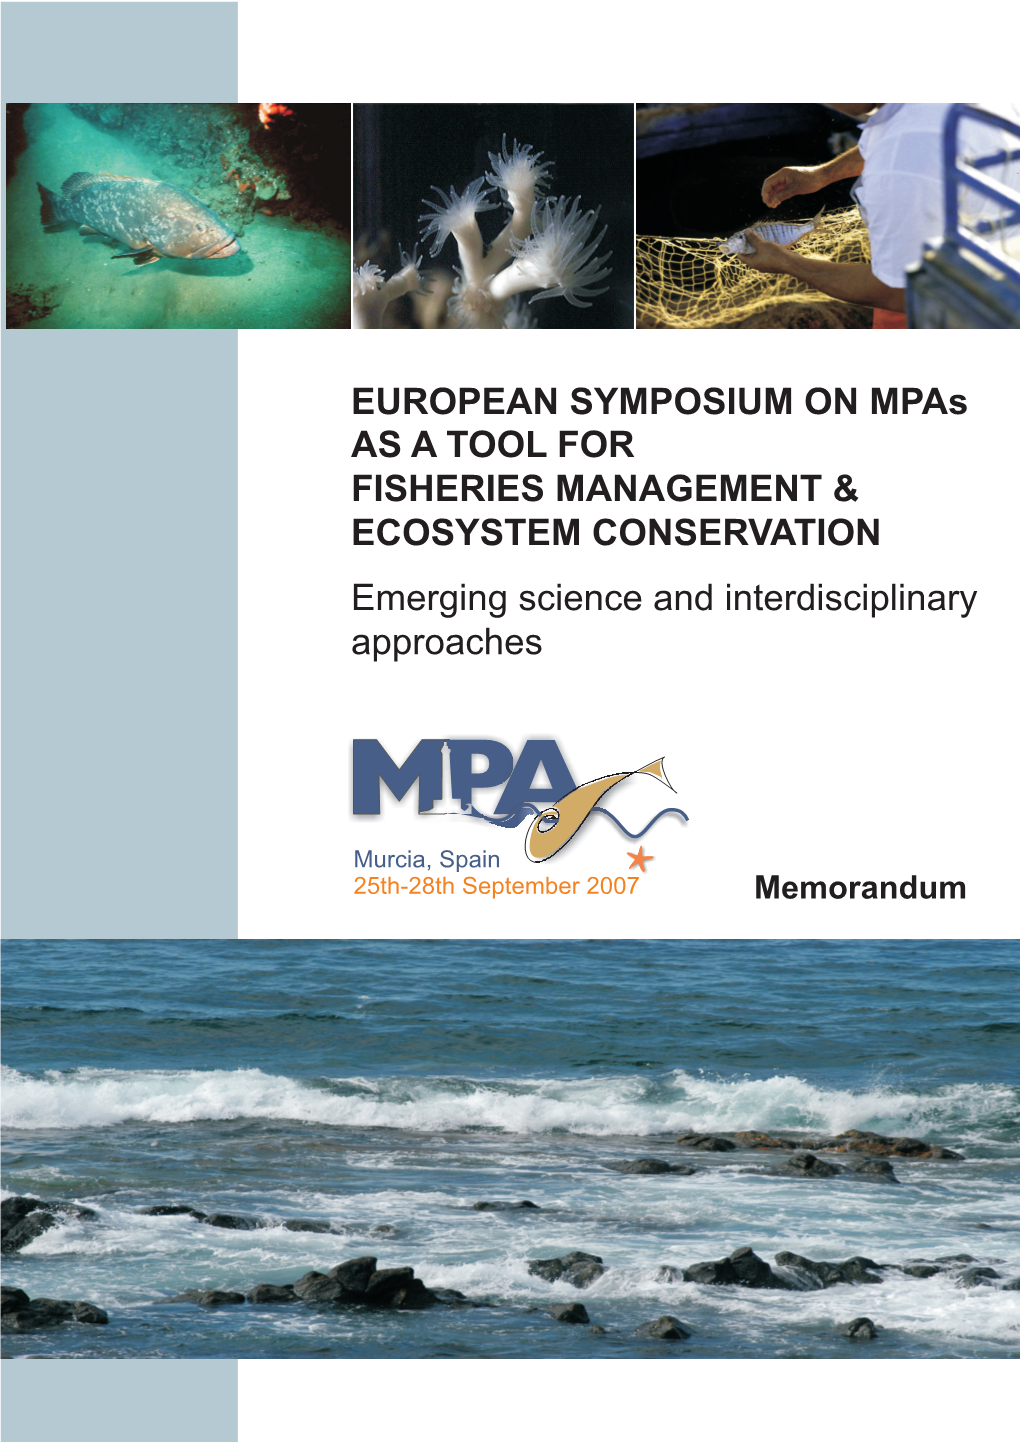 EUROPEAN SYMPOSIUM on Mpas AS a TOOL for FISHERIES MANAGEMENT & ECOSYSTEM CONSERVATION Emerging Science and Interdisciplinary Approaches